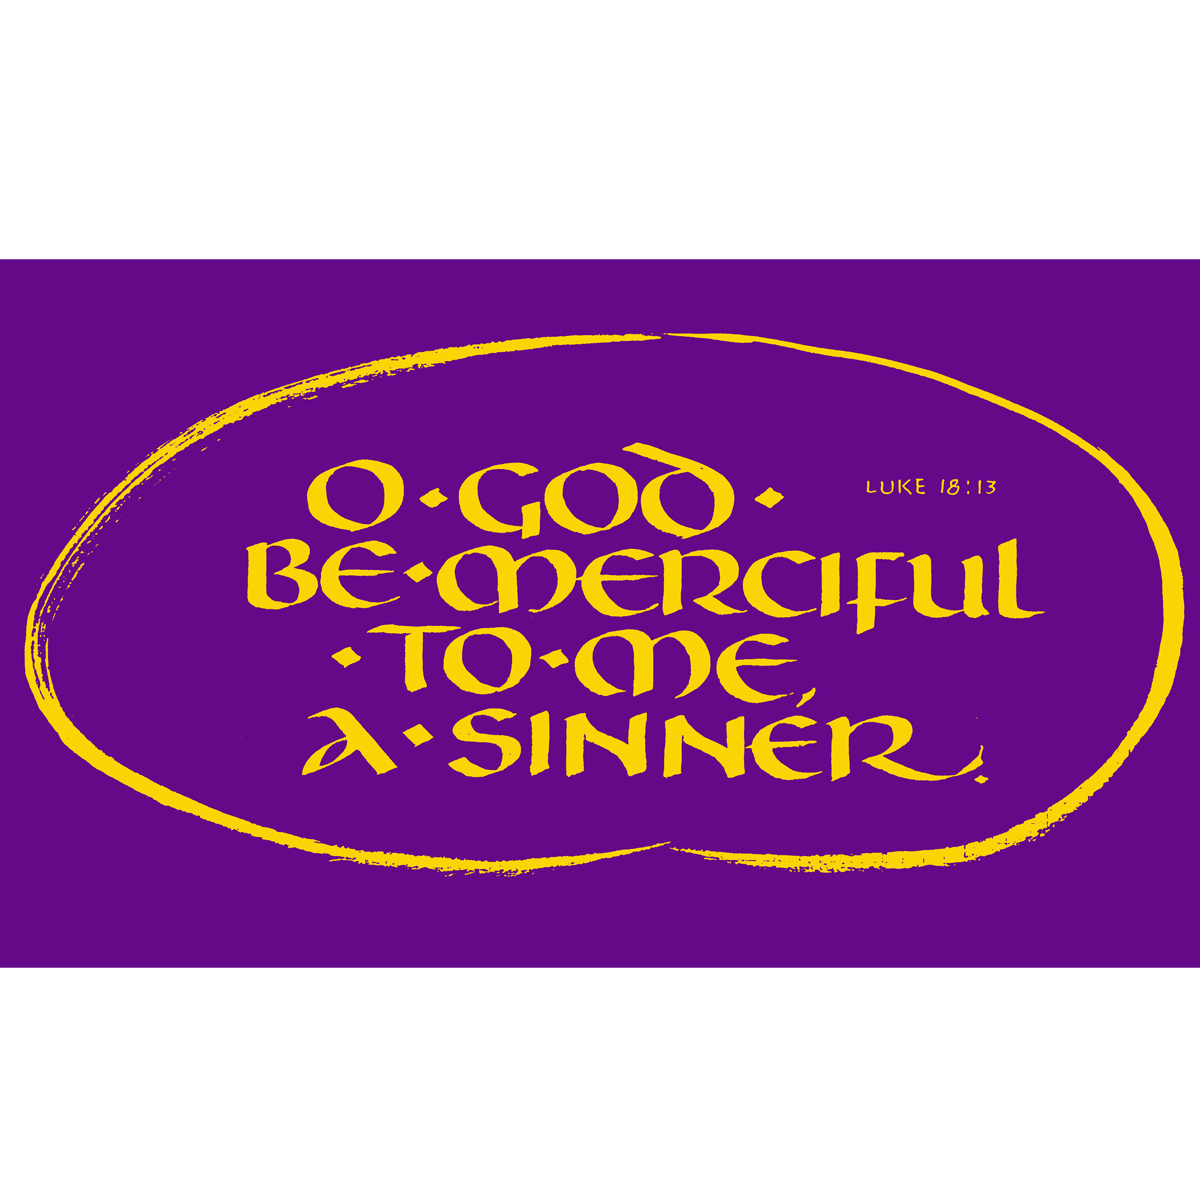 "O God be merciful to me a sinner" - calligraphy by Fr. Eric Lies